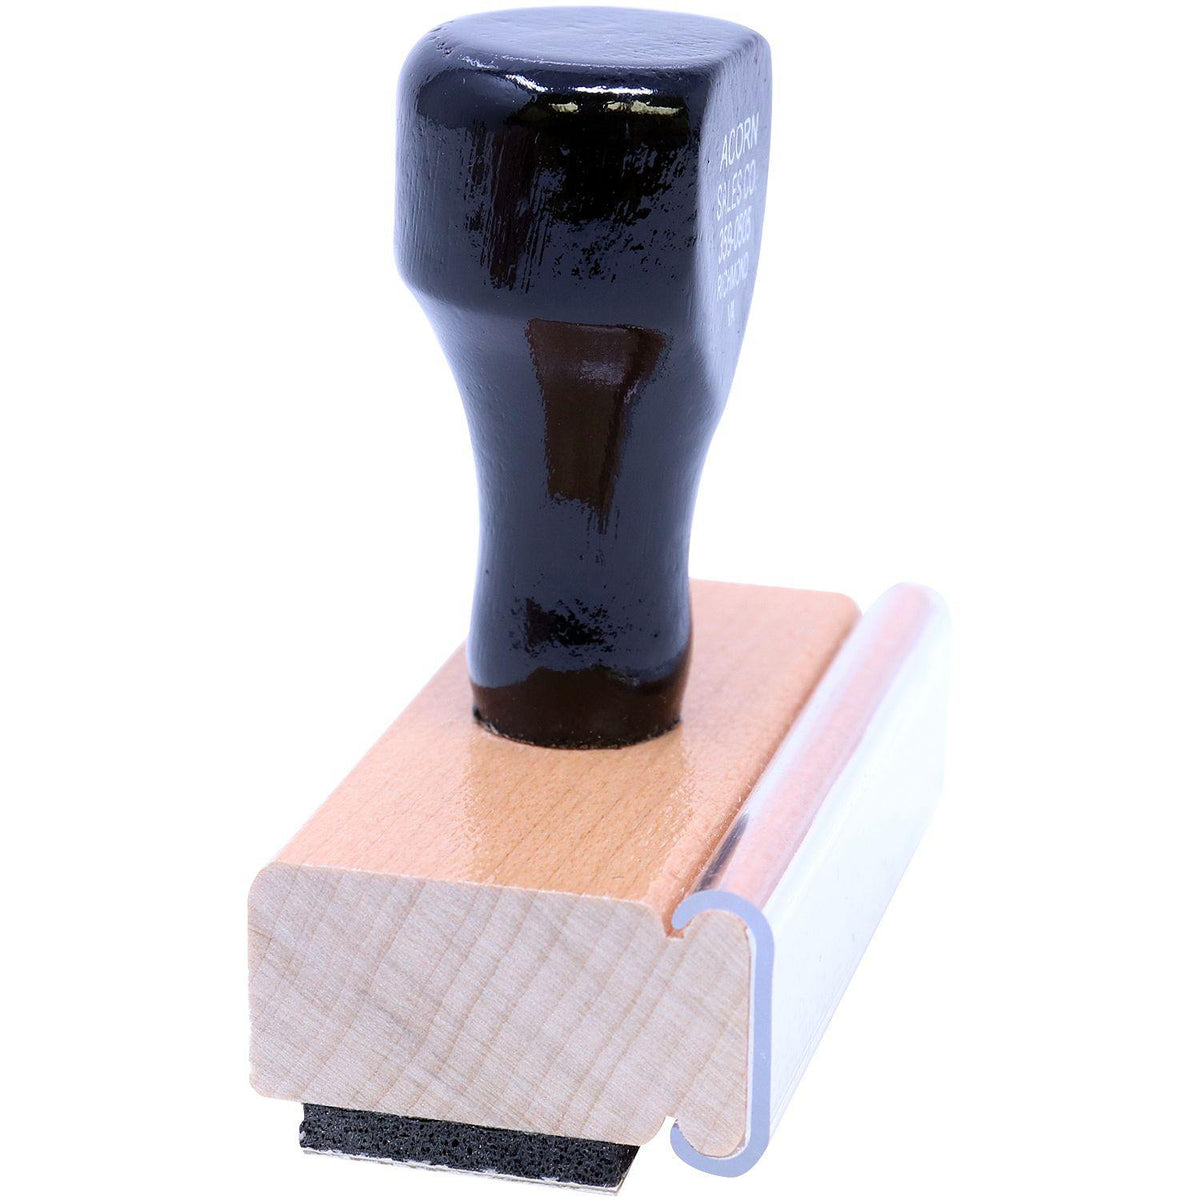 Side View of Faxed with Round Date Box Rubber Stamp at an Angle